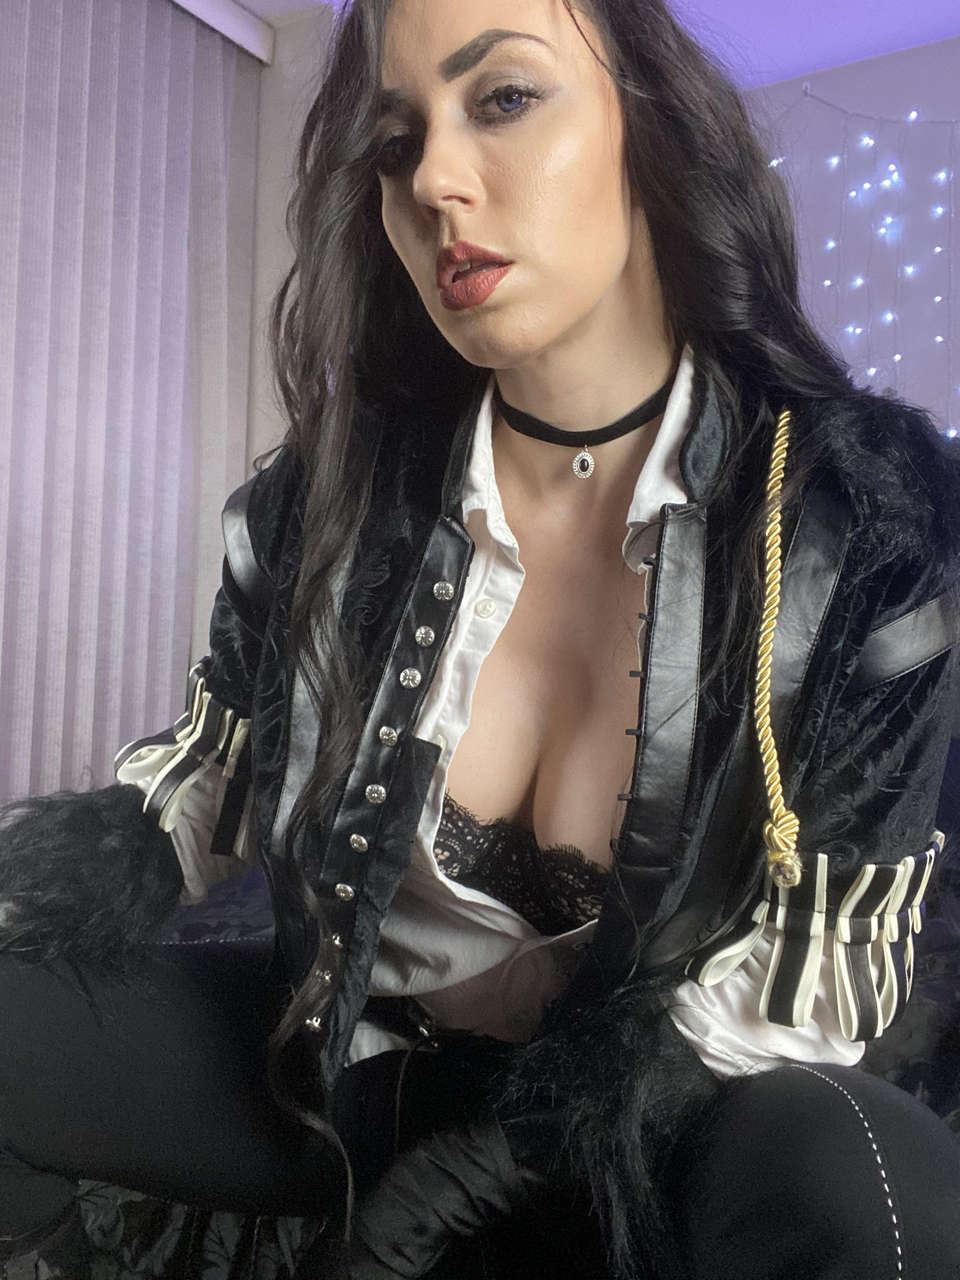 Yennefer Of Vengerberg The Witcher Selfnsf